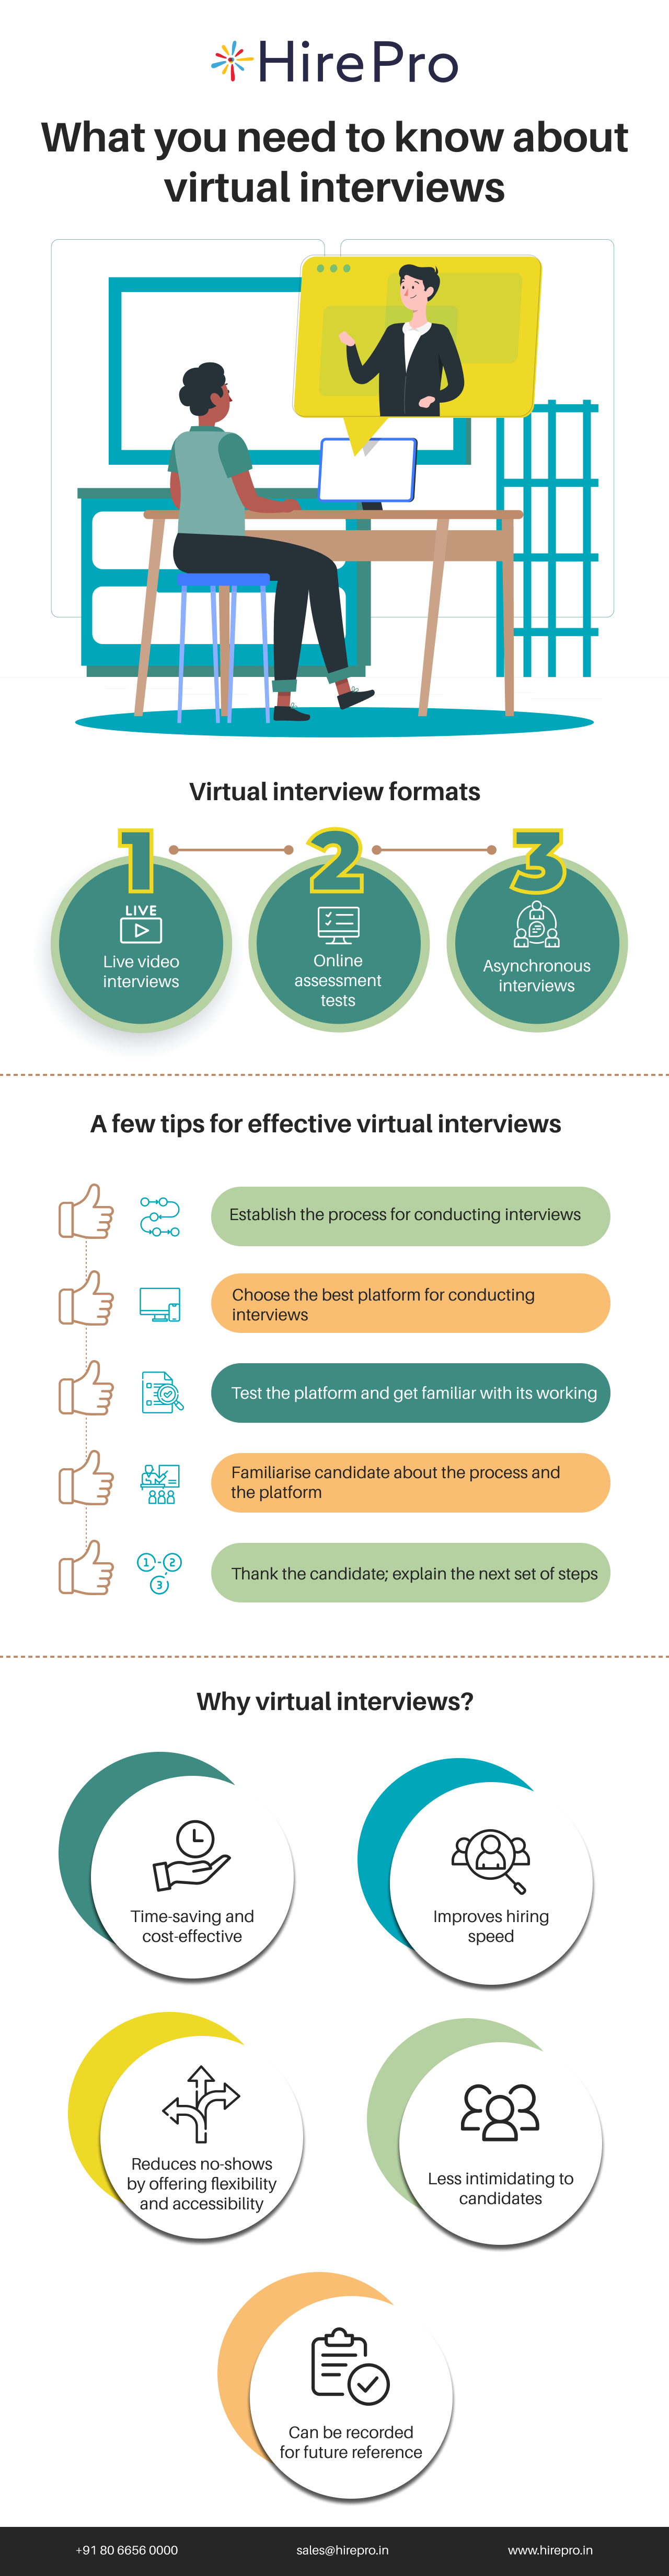 What you need to know about virtual interviews